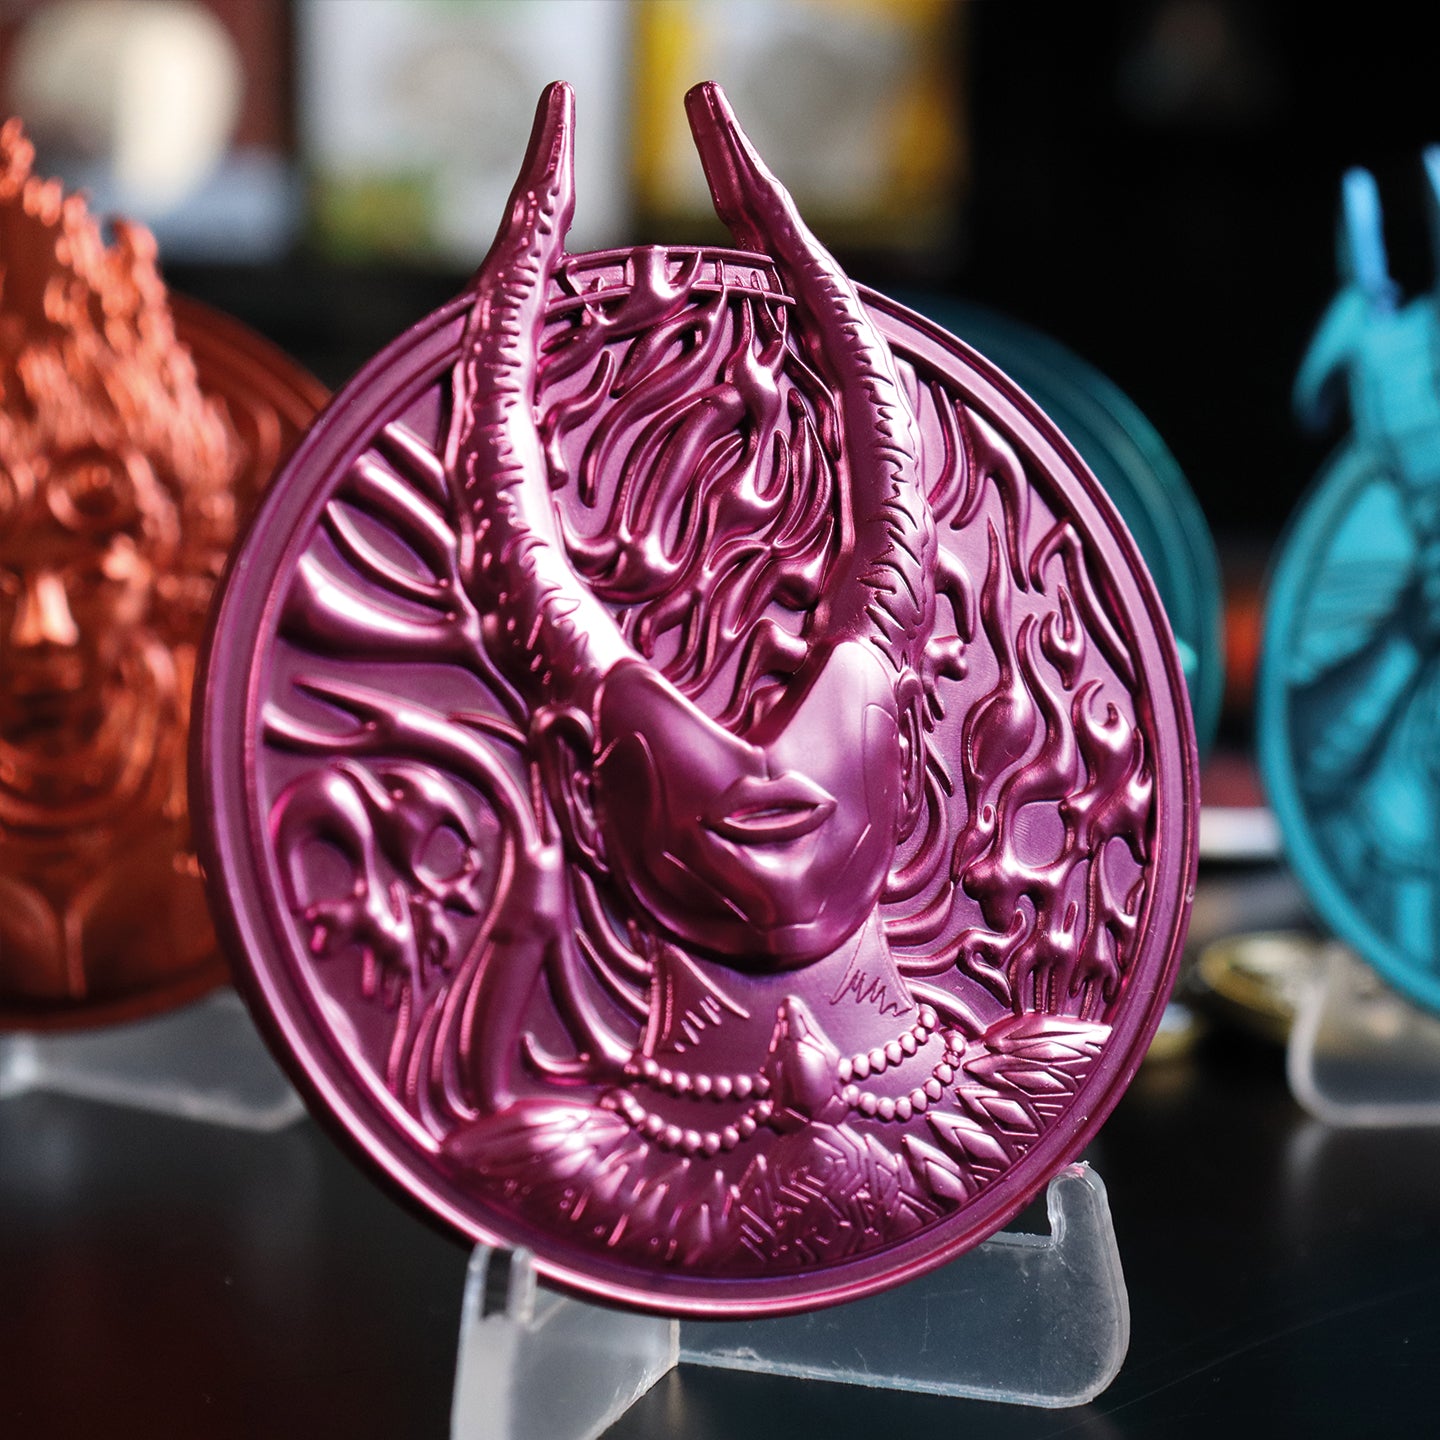 Magic the Gathering Limited Edition Planeswalkers Medallion Collection